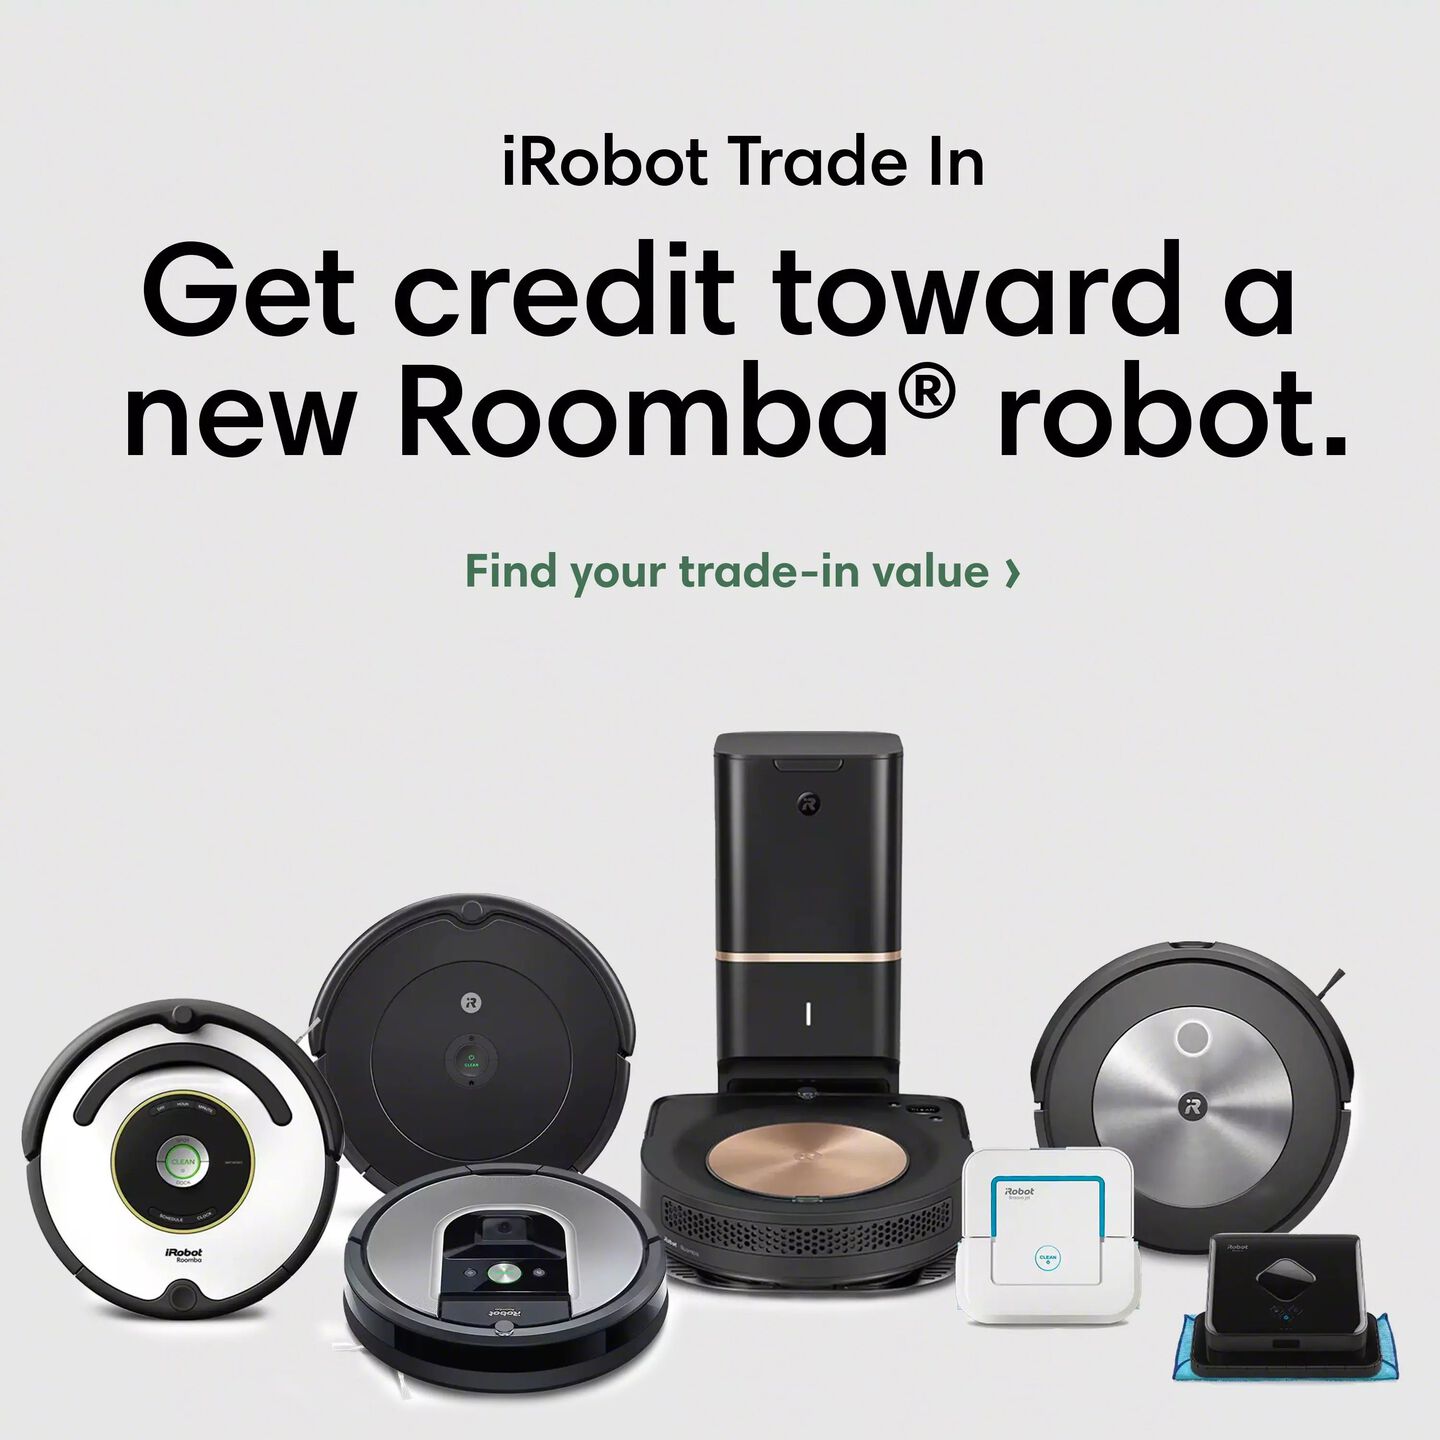 iRobot Trade In | Get credit toward a new Roomba. | Find your trade-in-value | iRobot Catalog of robots